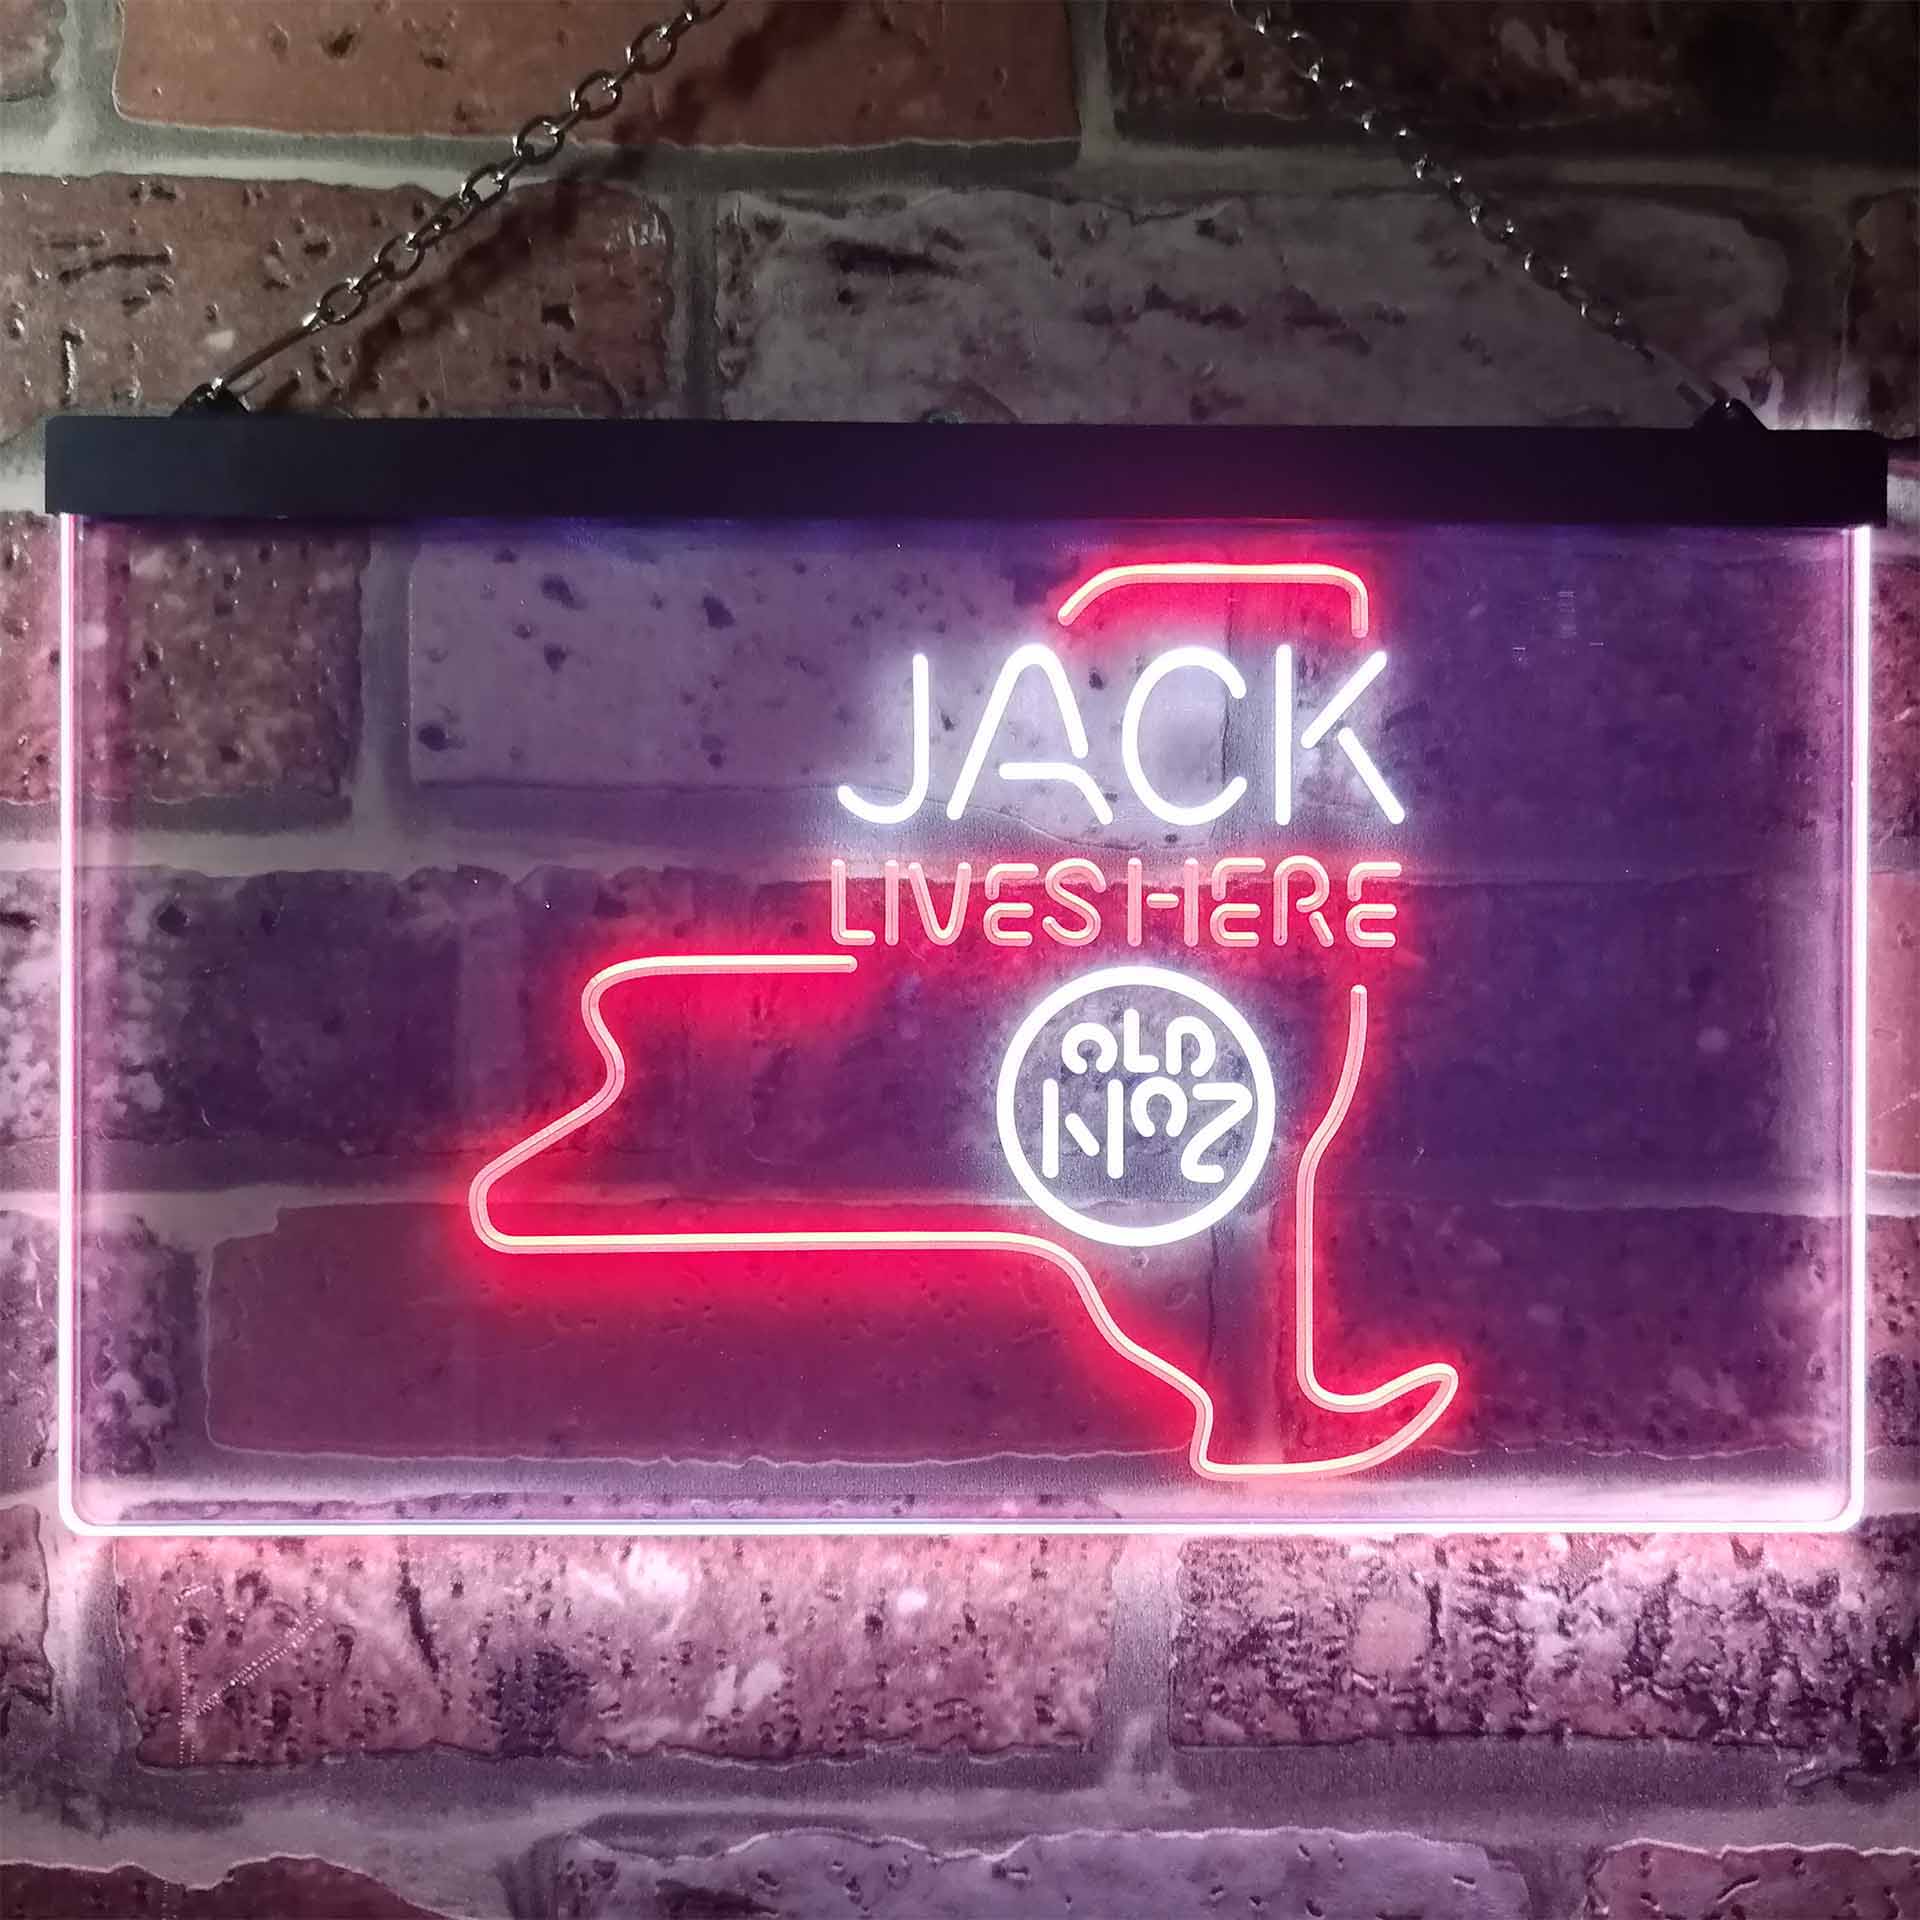 New York Jack Lives Here Dual Color LED Neon Sign ProLedSign